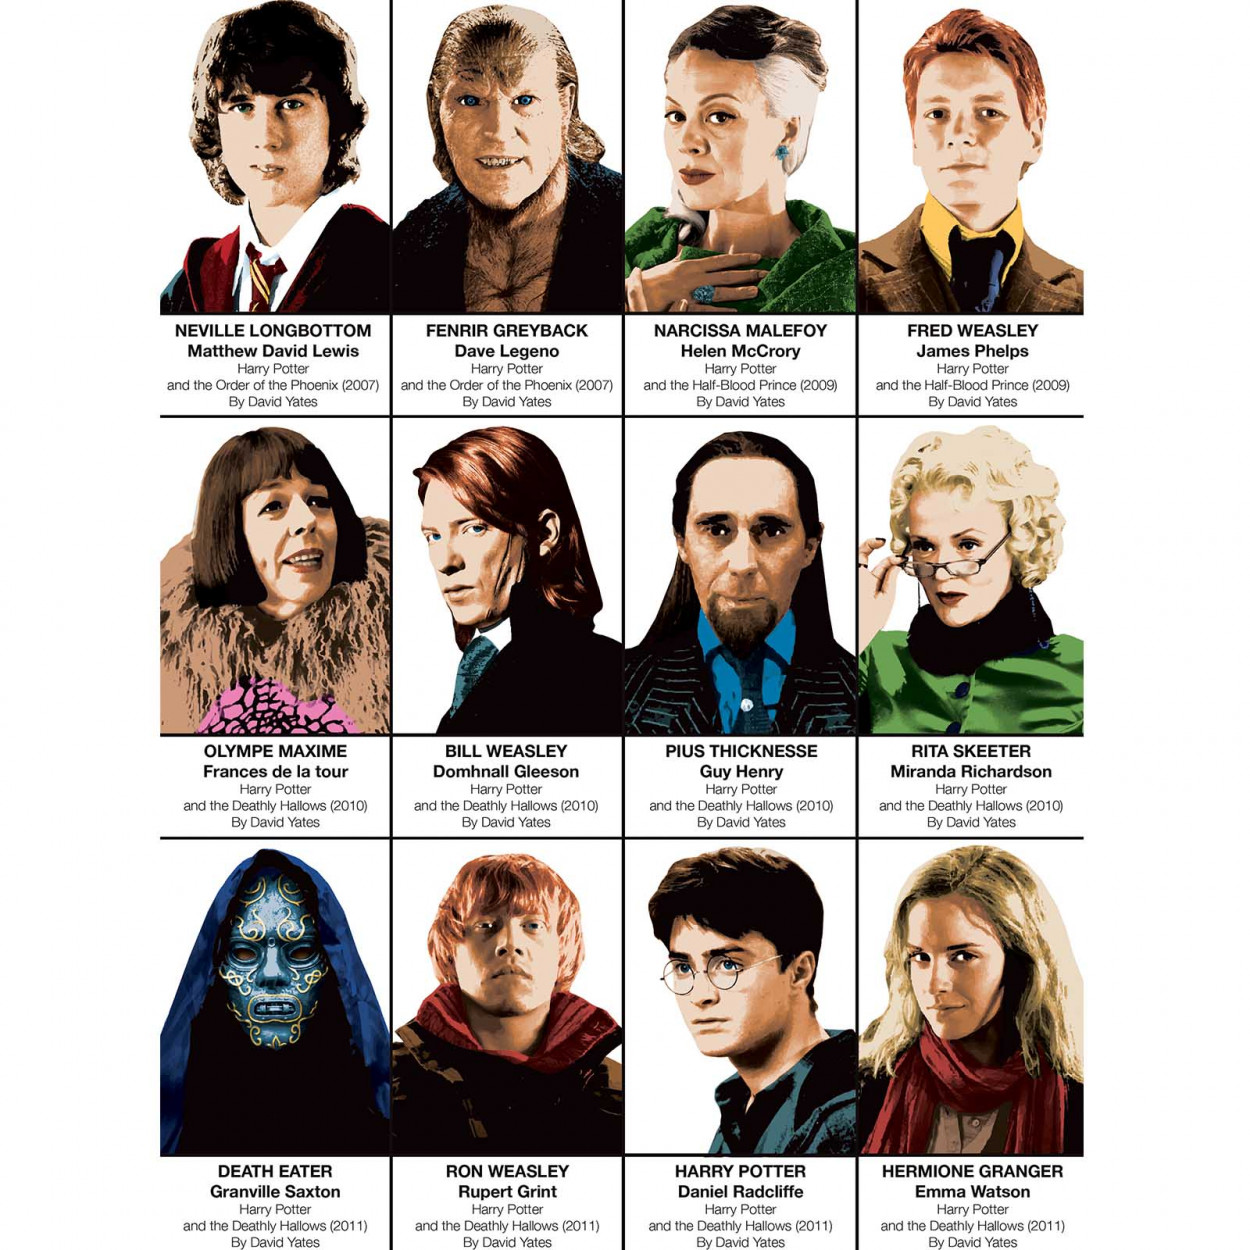 Art-Poster Pop - Harry Potter characters, by Olivier Bourdereau